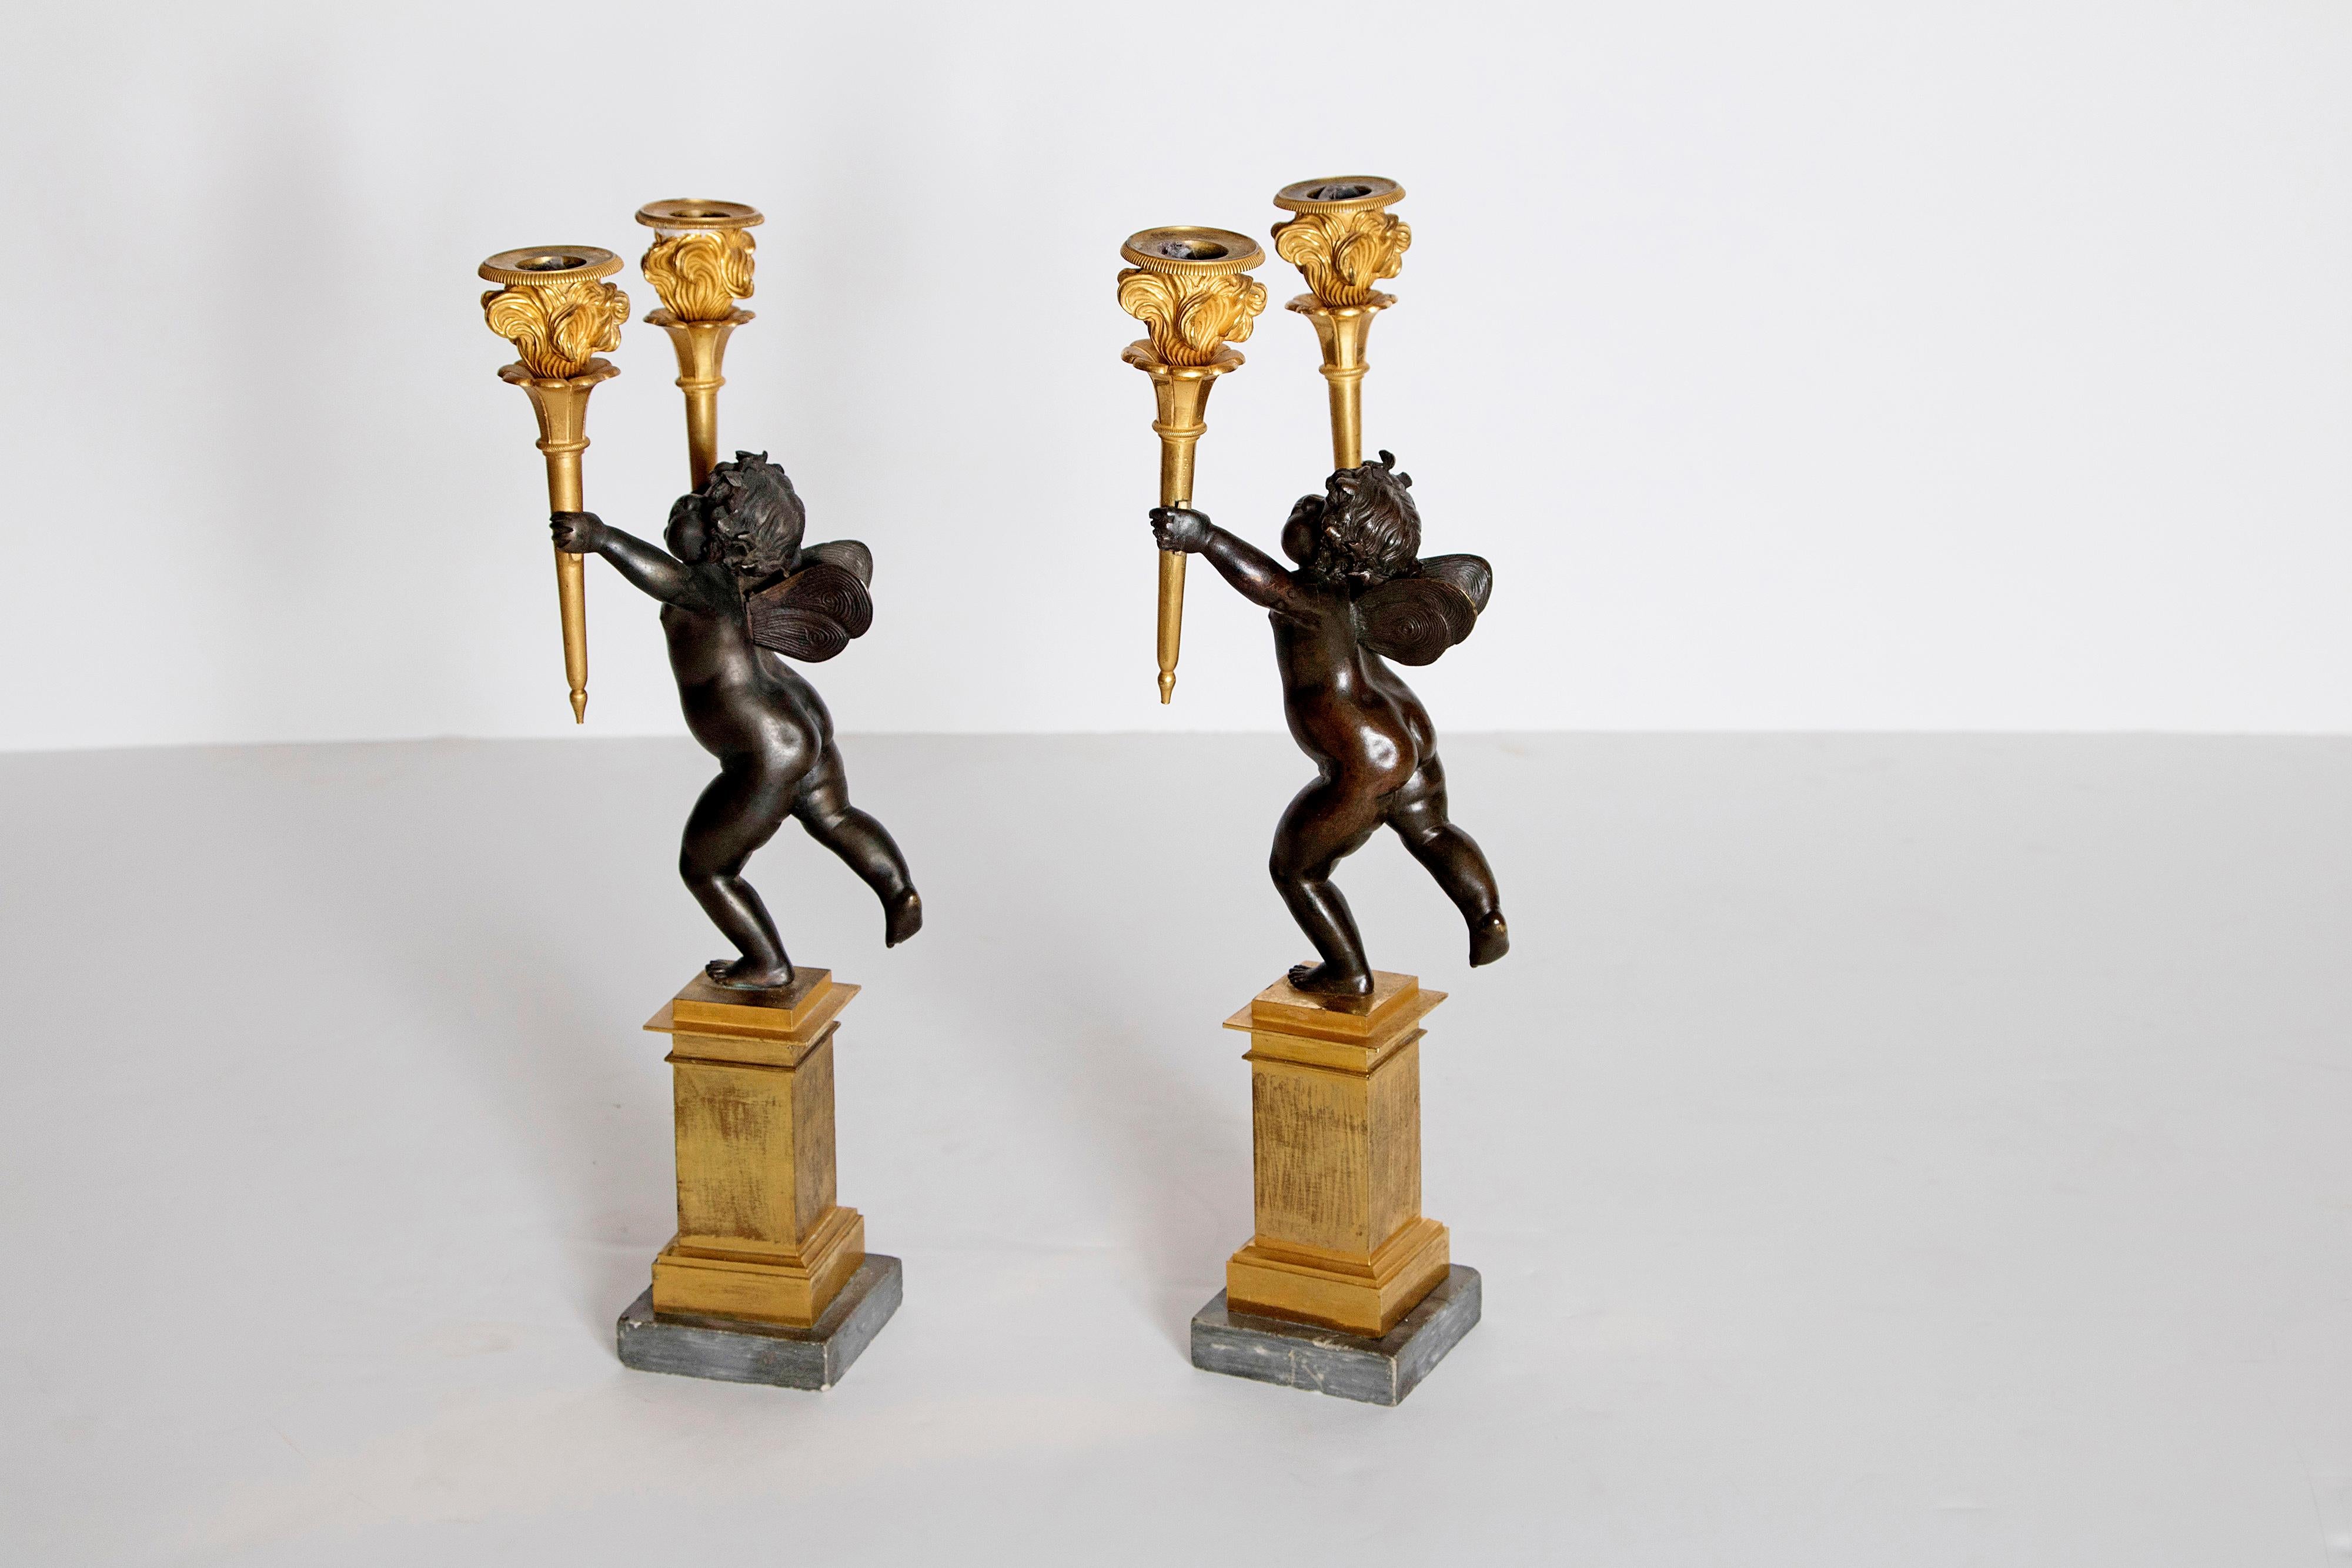 Pair of French Charles X Patinated Bronze and Gilt Figurative Candelabras For Sale 6